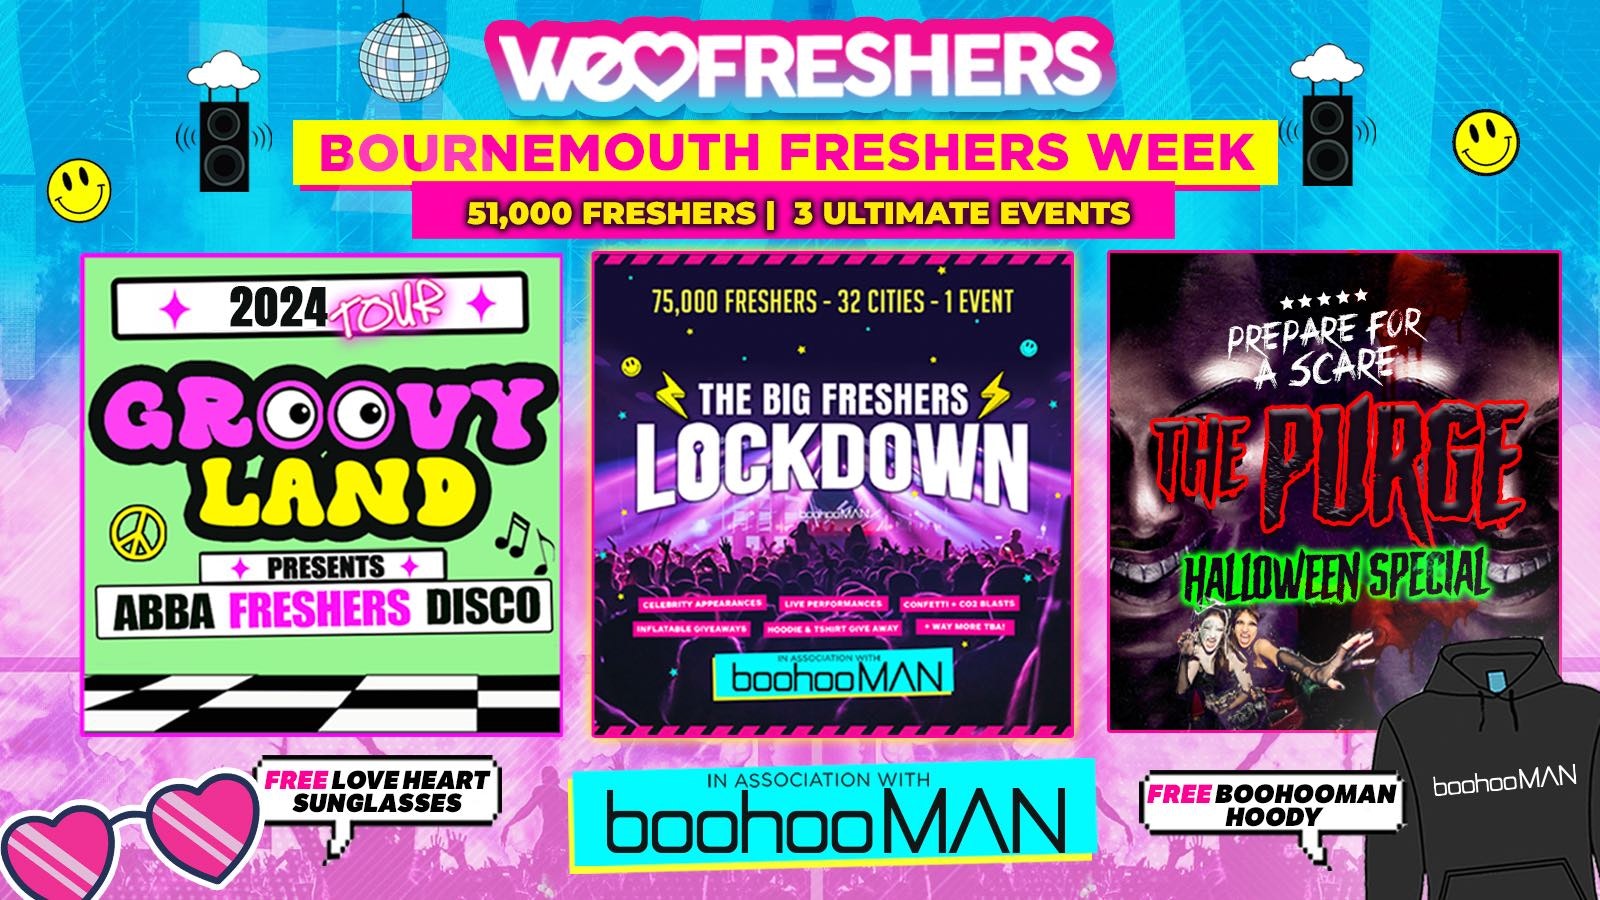 WE LOVE BOURNEMOUTH FRESHERS 2024 in association with boohooMAN – ❗ 3 EVENTS ❗